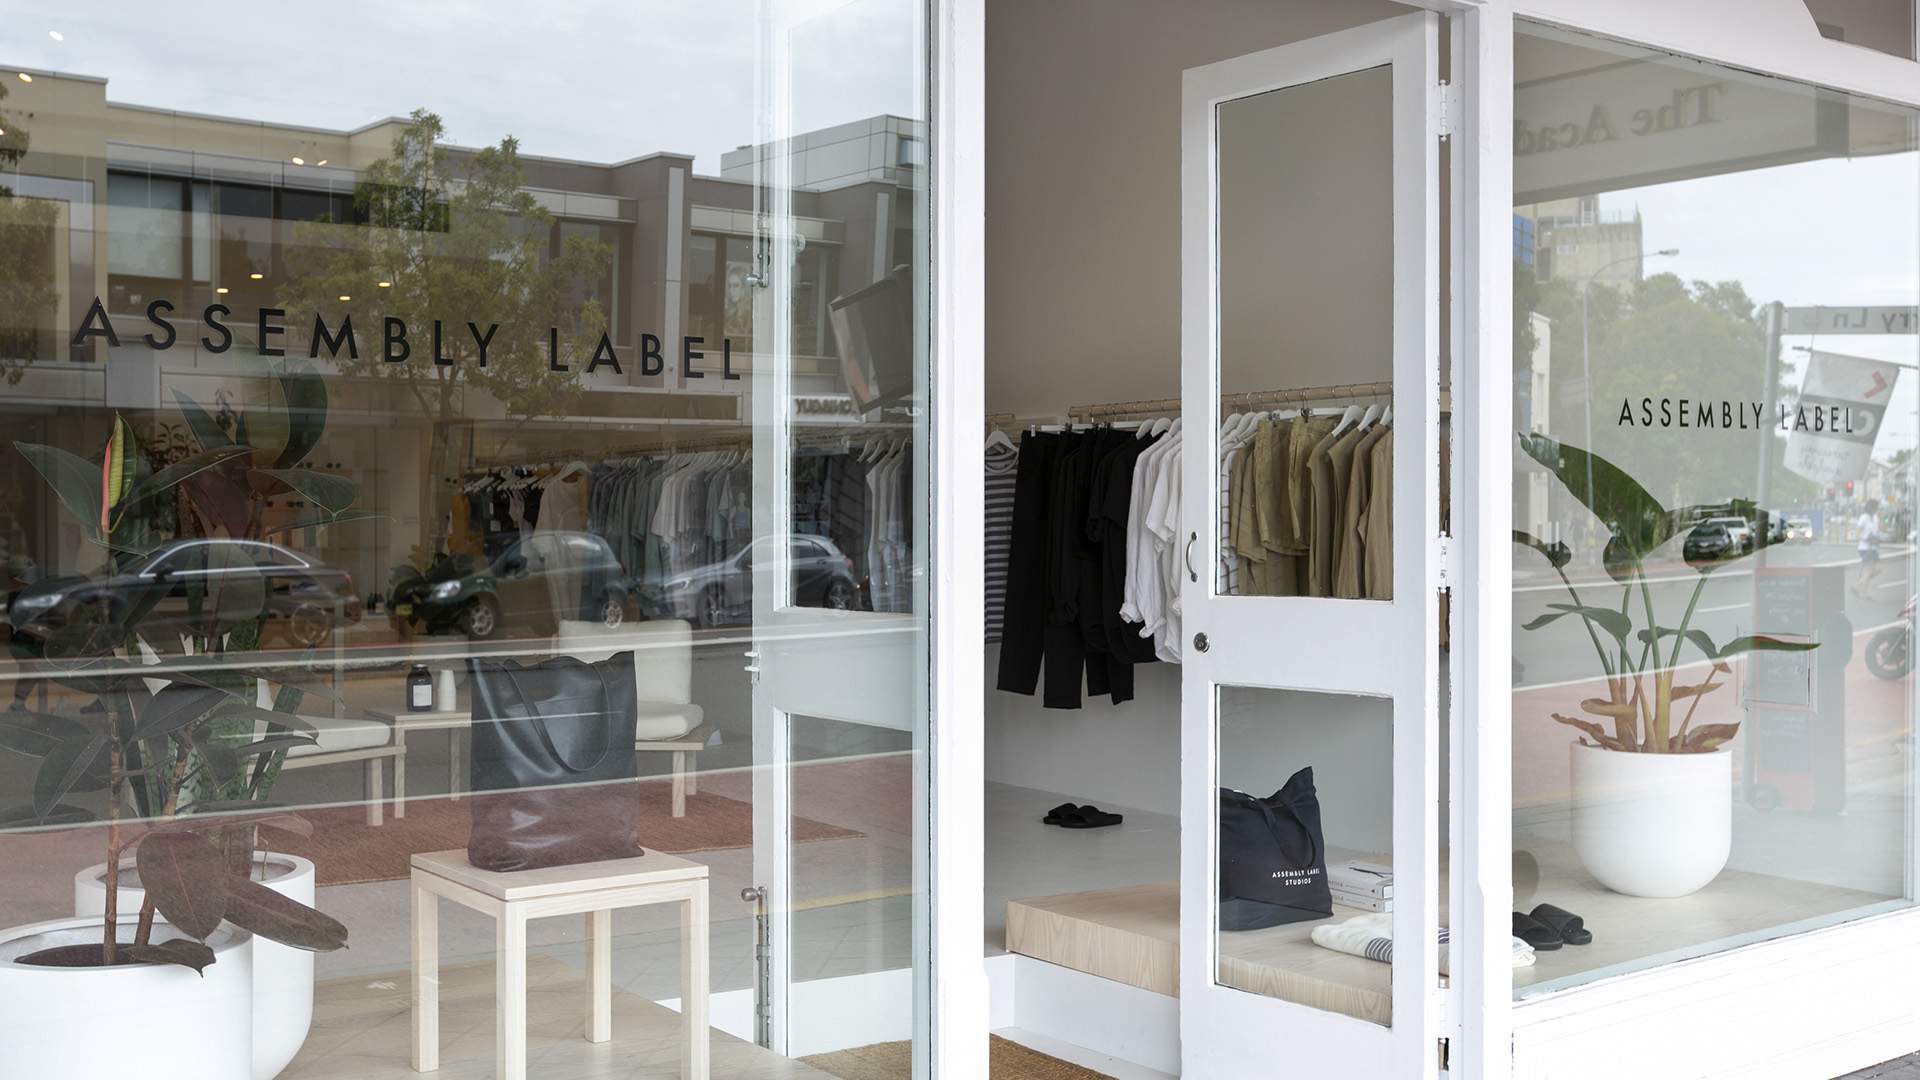 Assembly Label Expands Its Minimalist Clothing Empire to Sydney's Eastern Suburbs